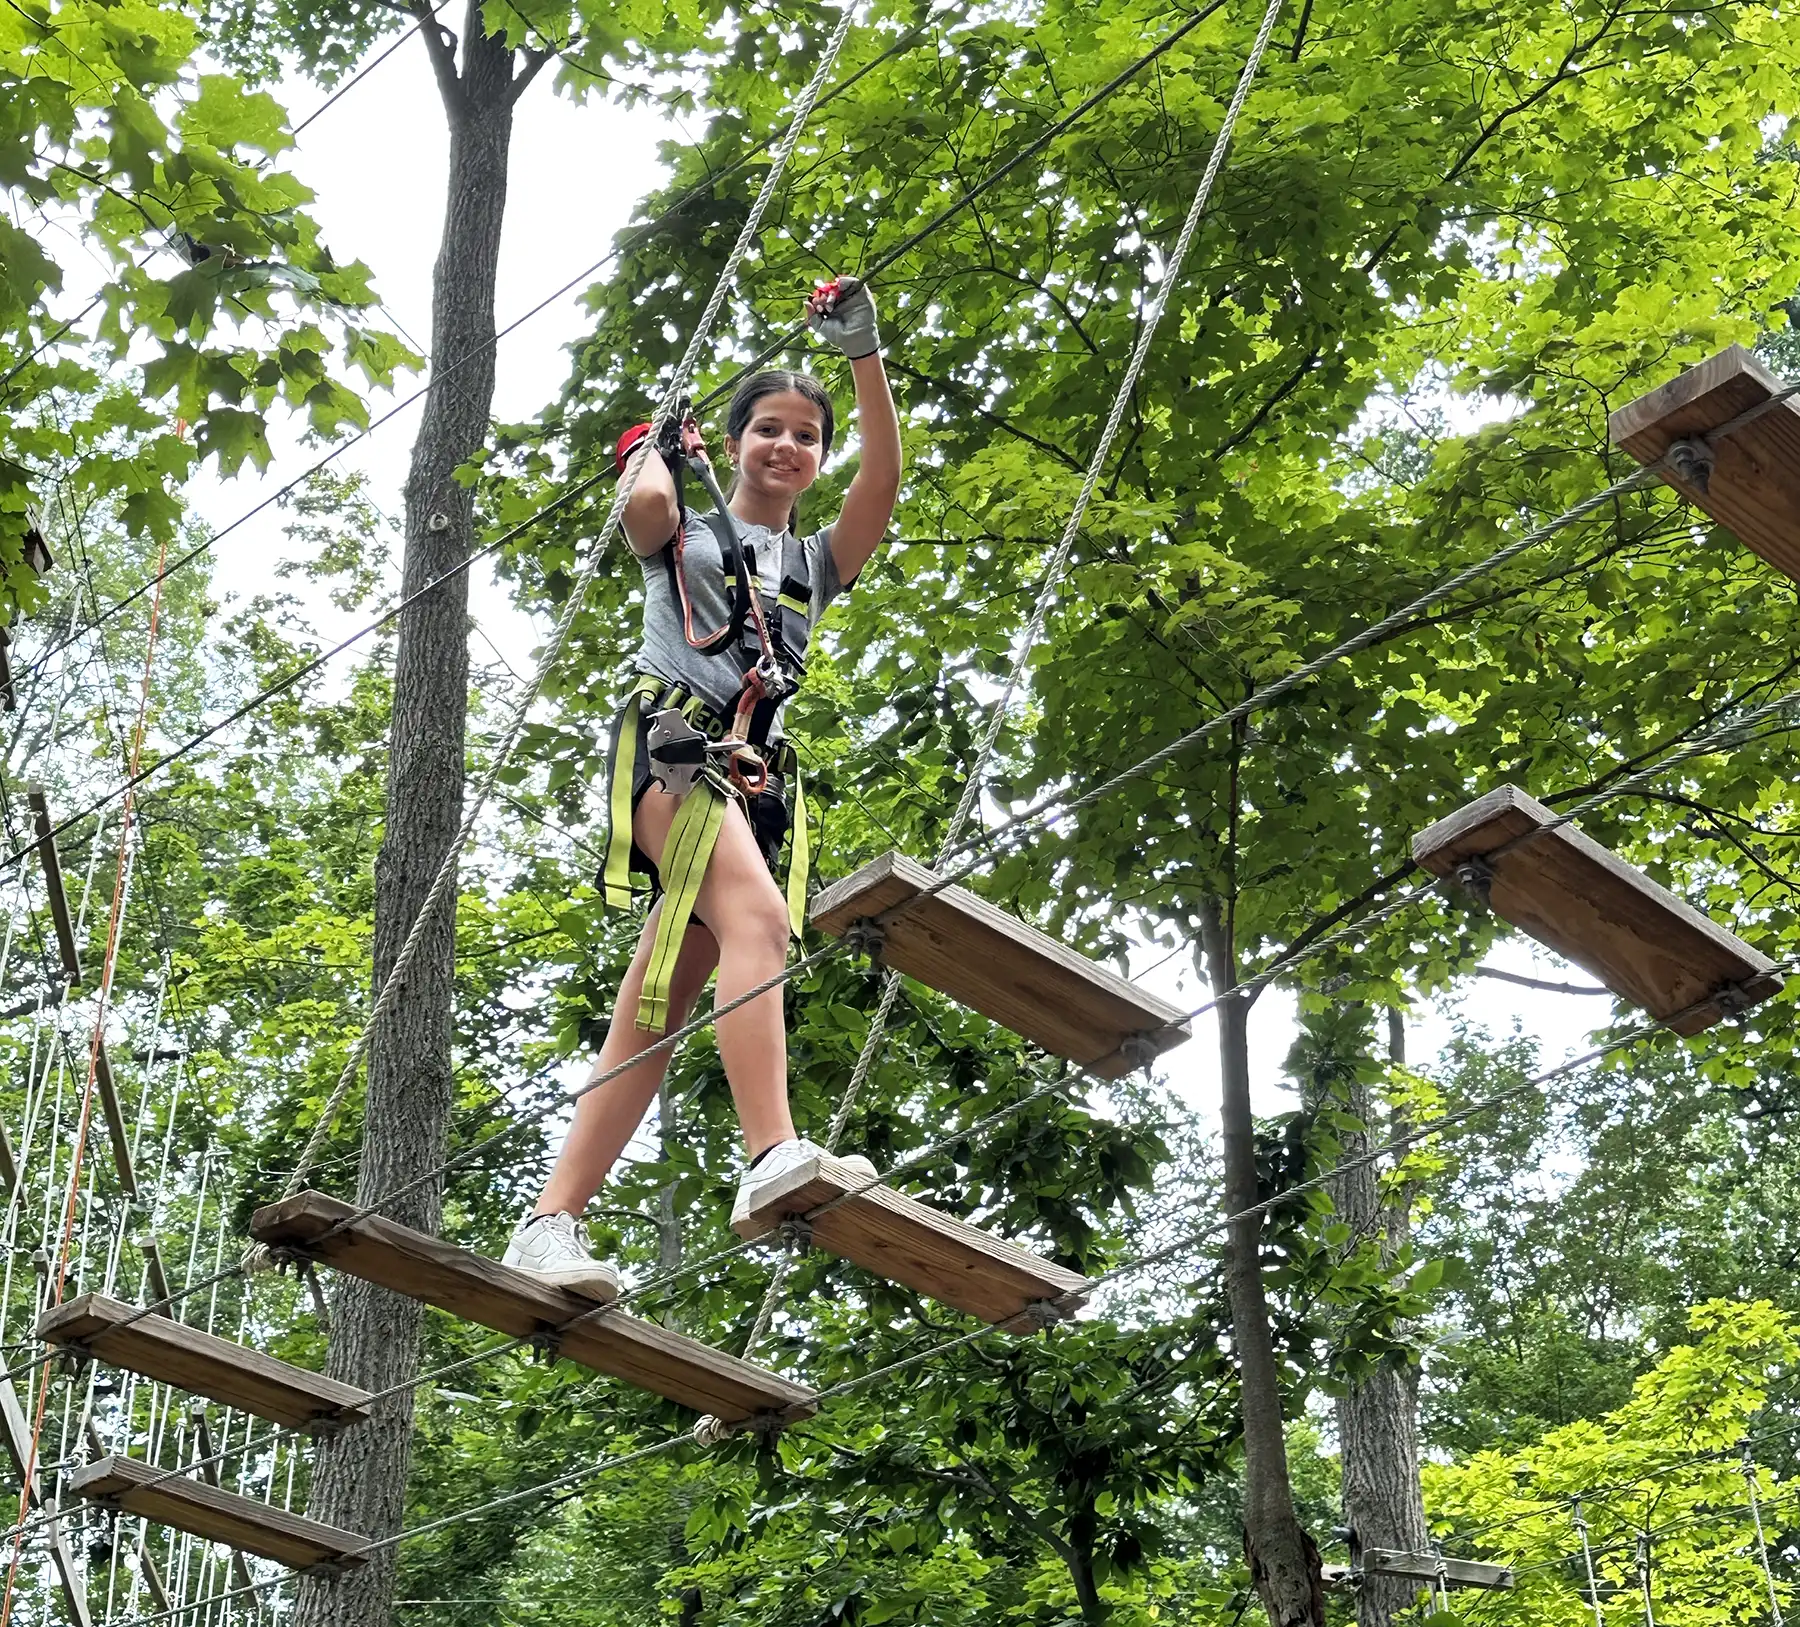 Teenage girl on obstacle course in the tree tops.